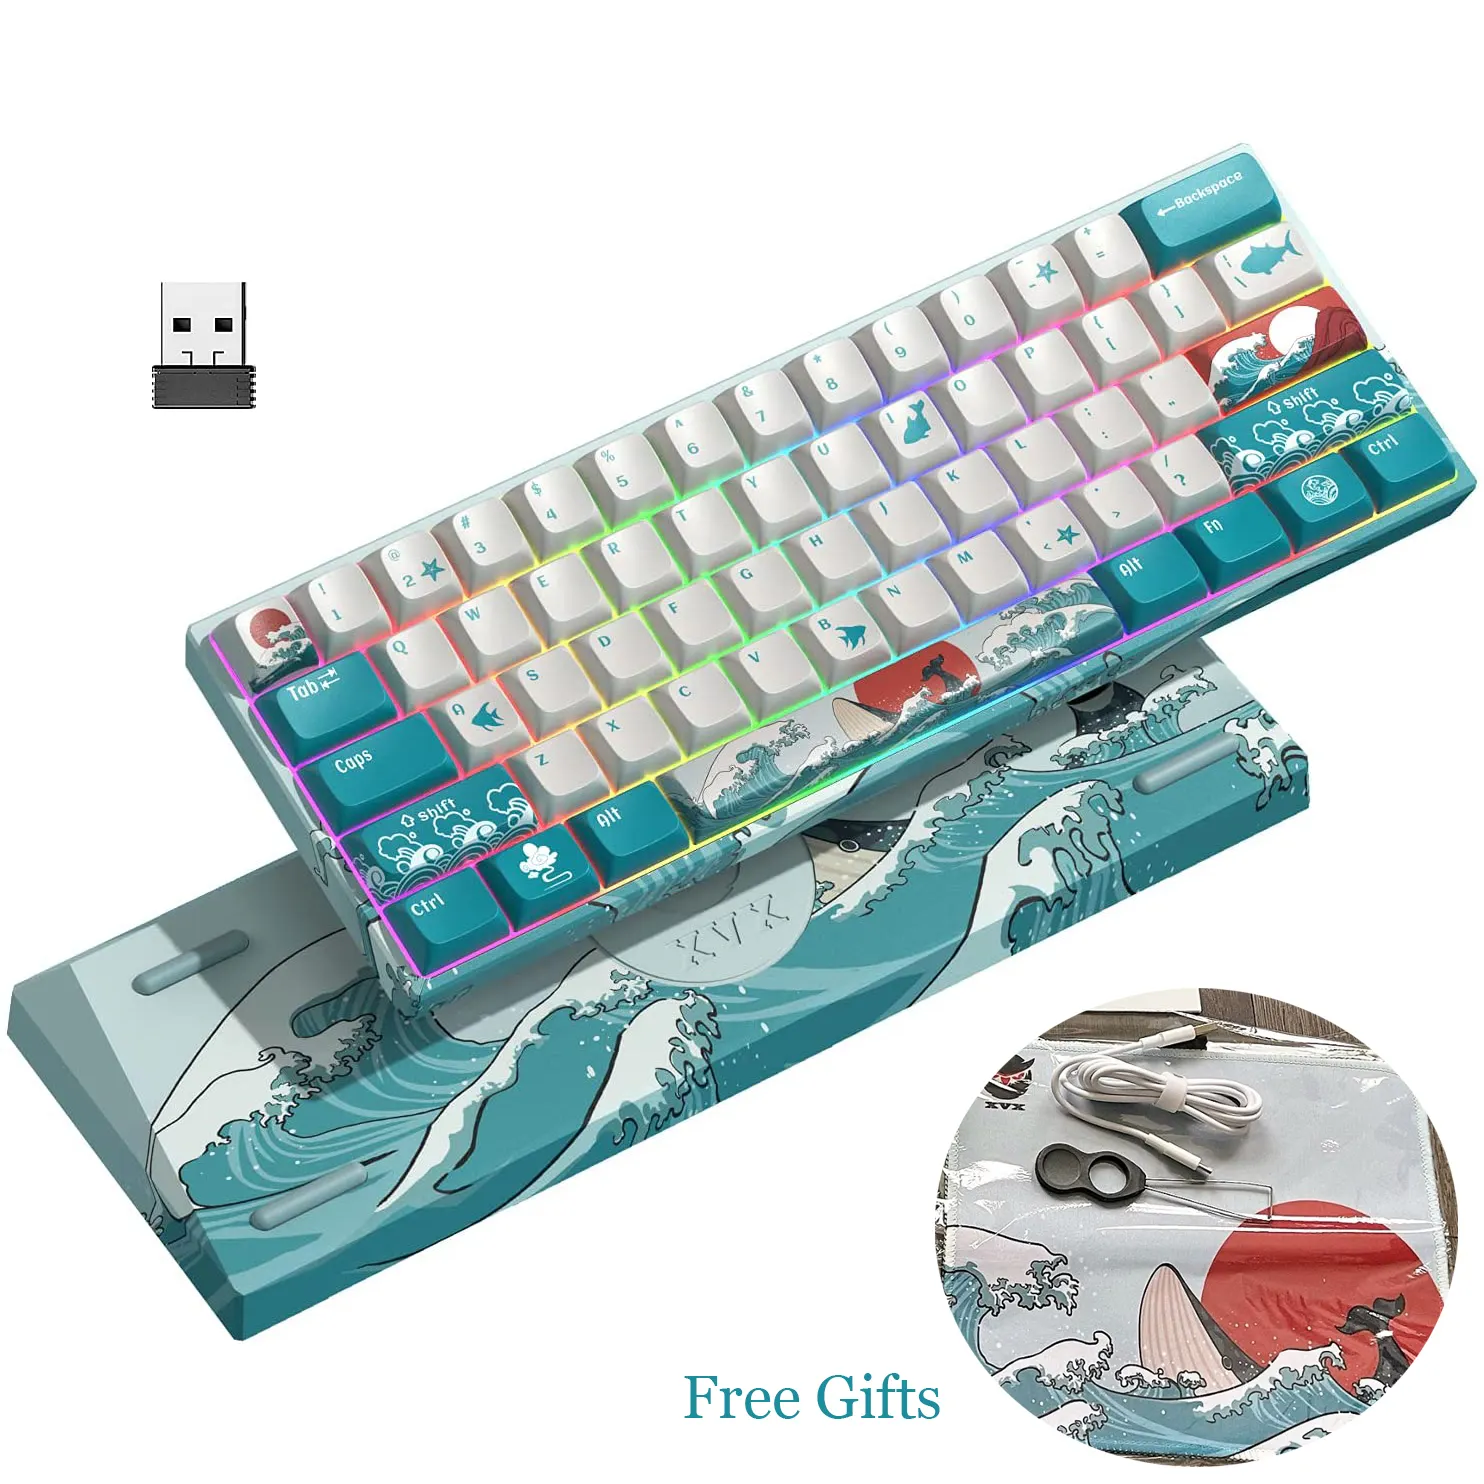 XVX M61 Wireless Mechanical Keyboard 61 Keys 2.4G Rechargeable RGB Backlit Gaming Keyboard 60% Coral Sea Gateron Switch for PC